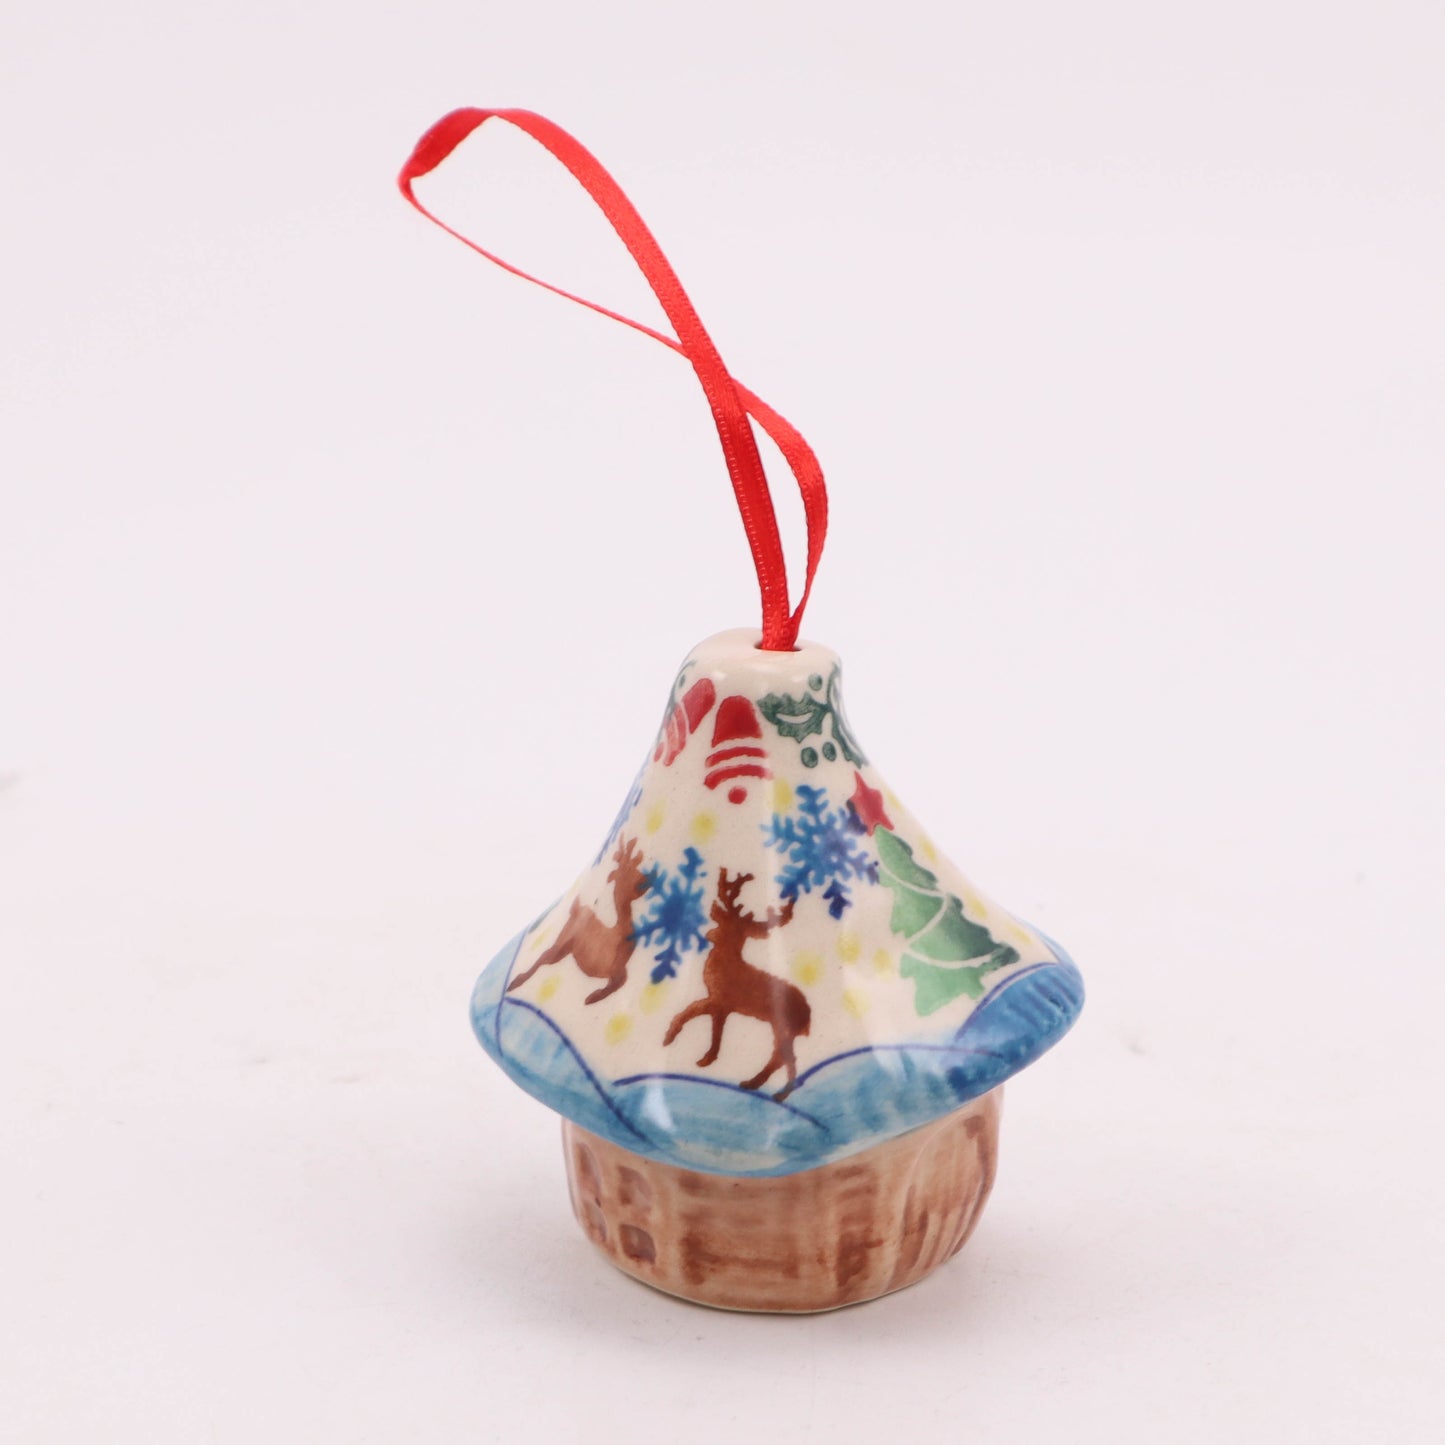 2.5"x2.5" Round Roof House Ornament. Pattern: Reindeer